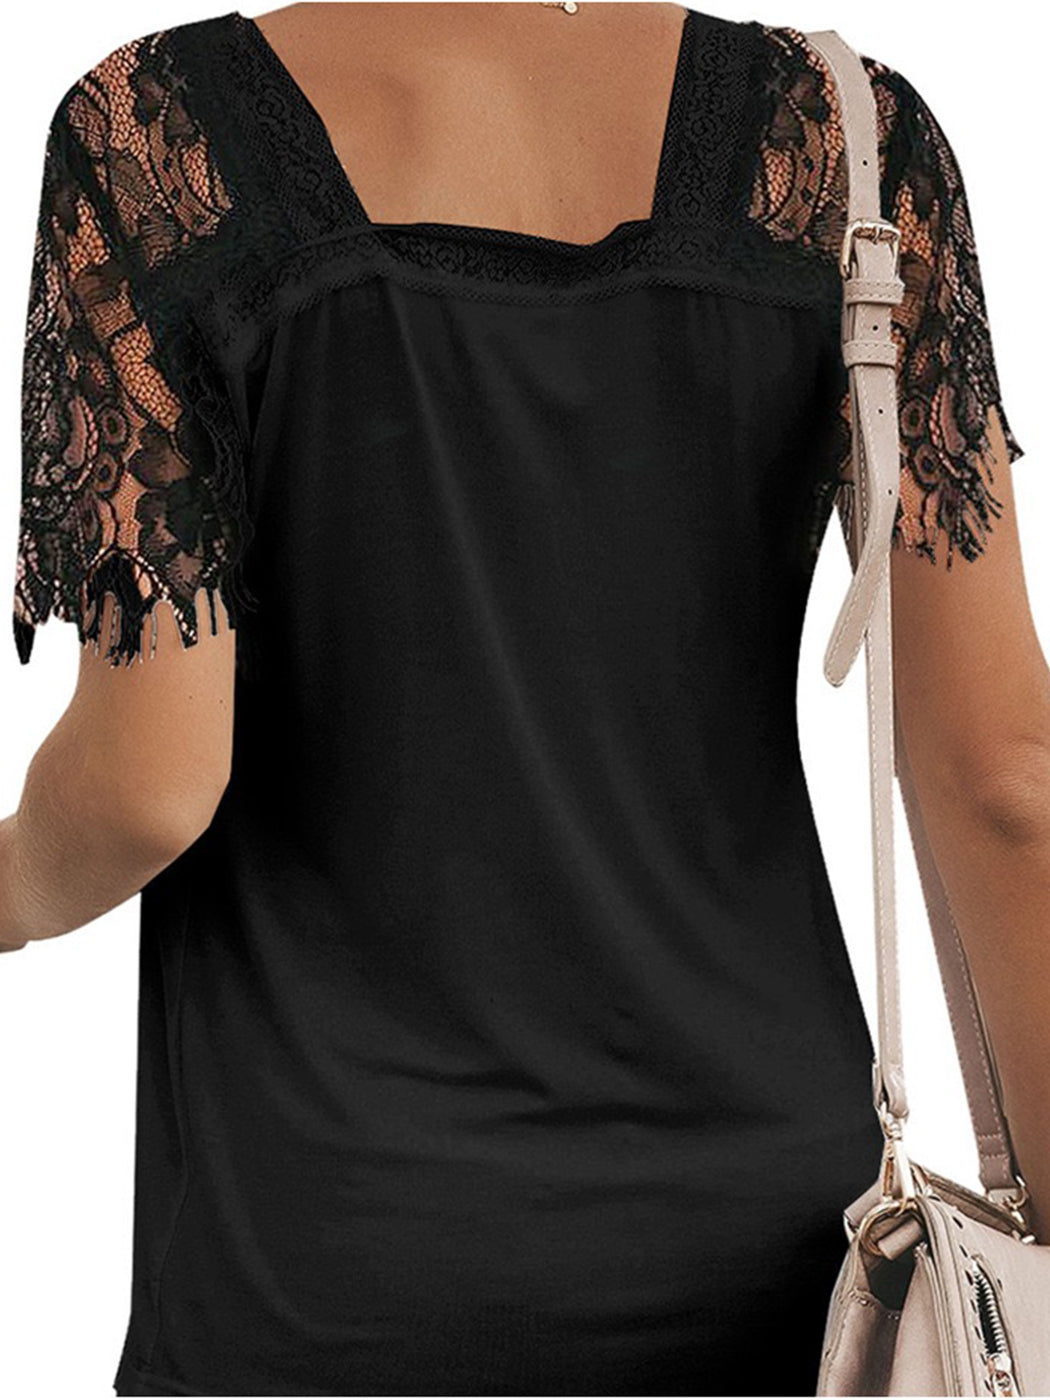 Lace Short Sleeve T-Shirt V Neck Cotton Summer Casual Tops Tee Shirts